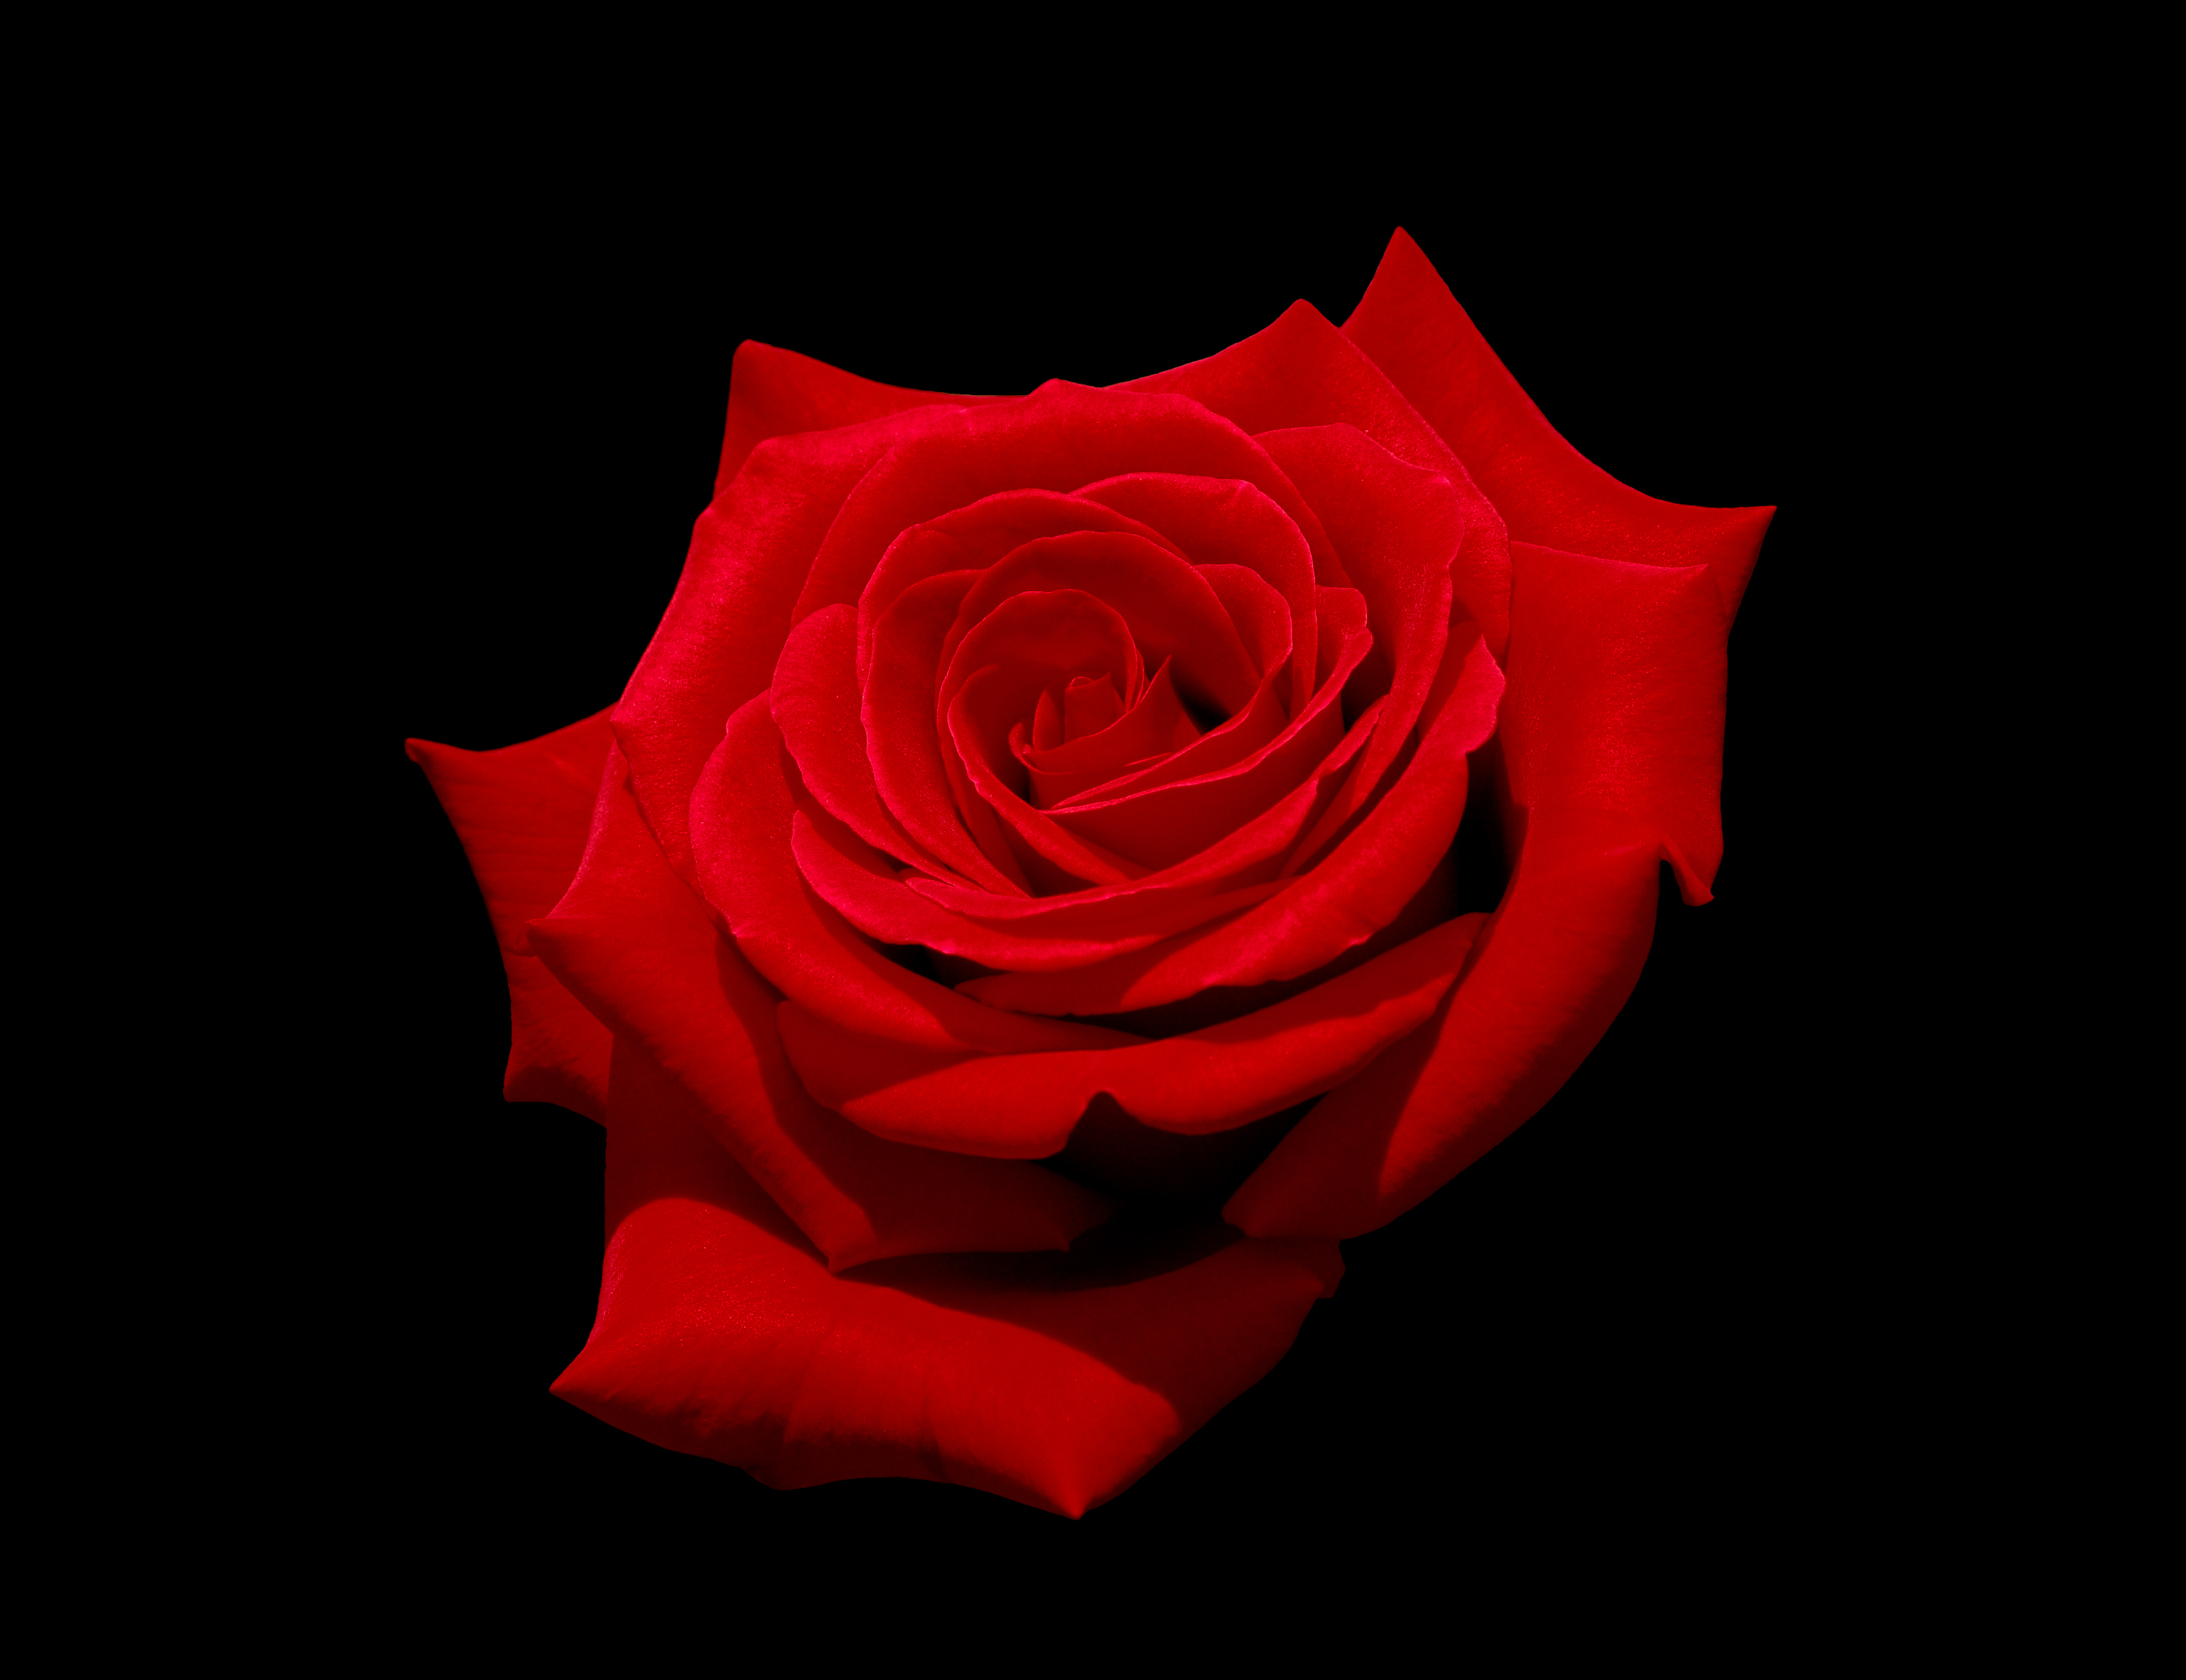 File:Red rose with black background.jpg - Wikimedia Commons